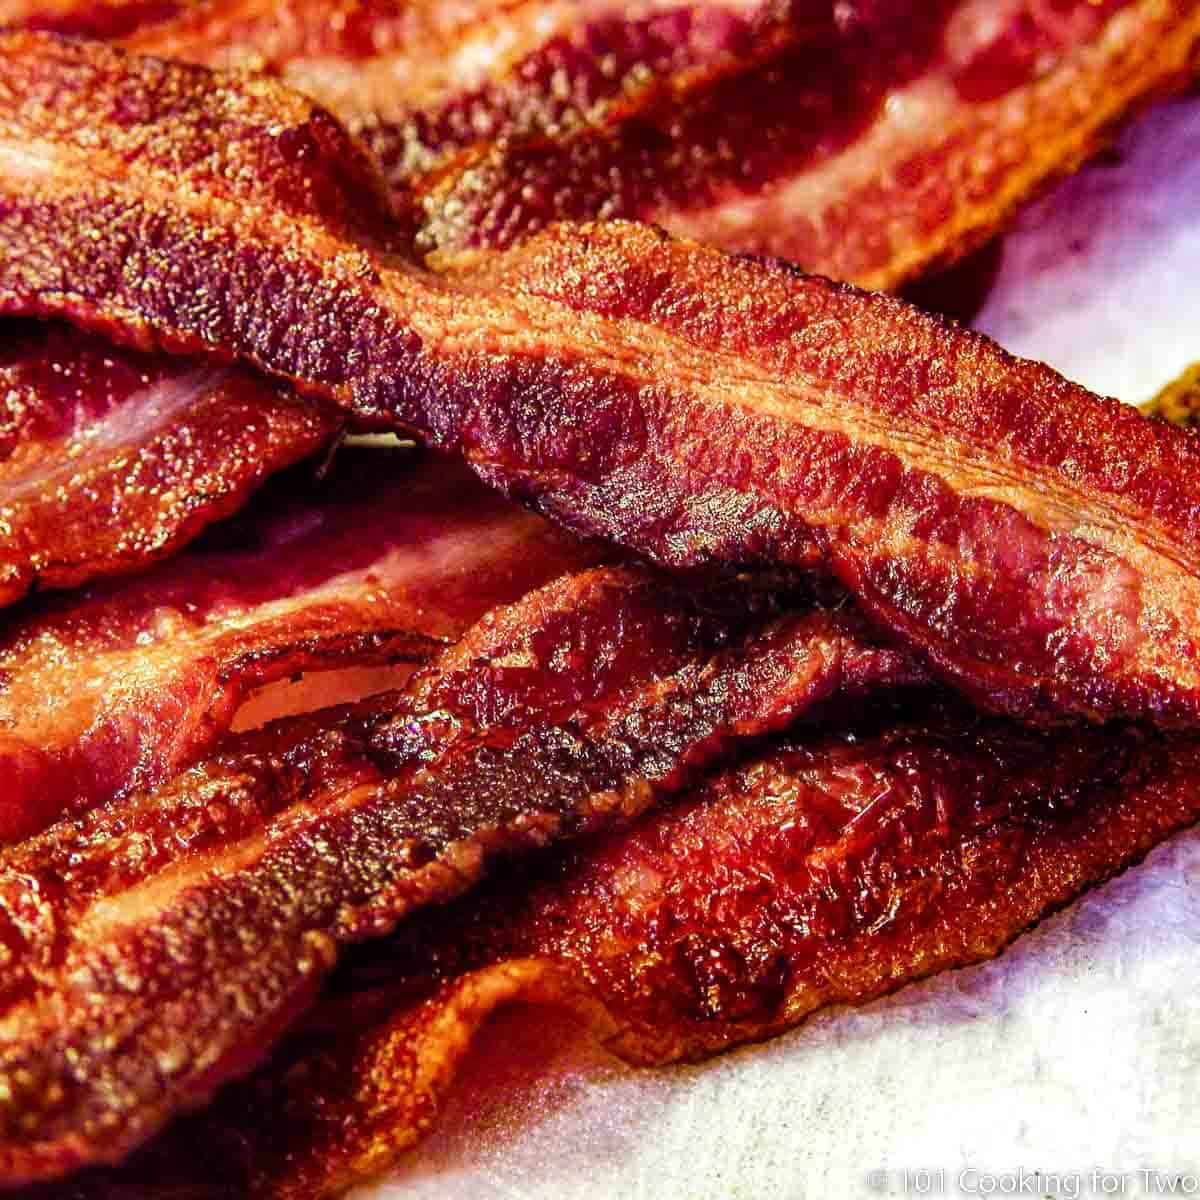 https://www.101cookingfortwo.com/wp-content/uploads/2022/10/pile-of-cooked-bacon-on-white-plate.jpg